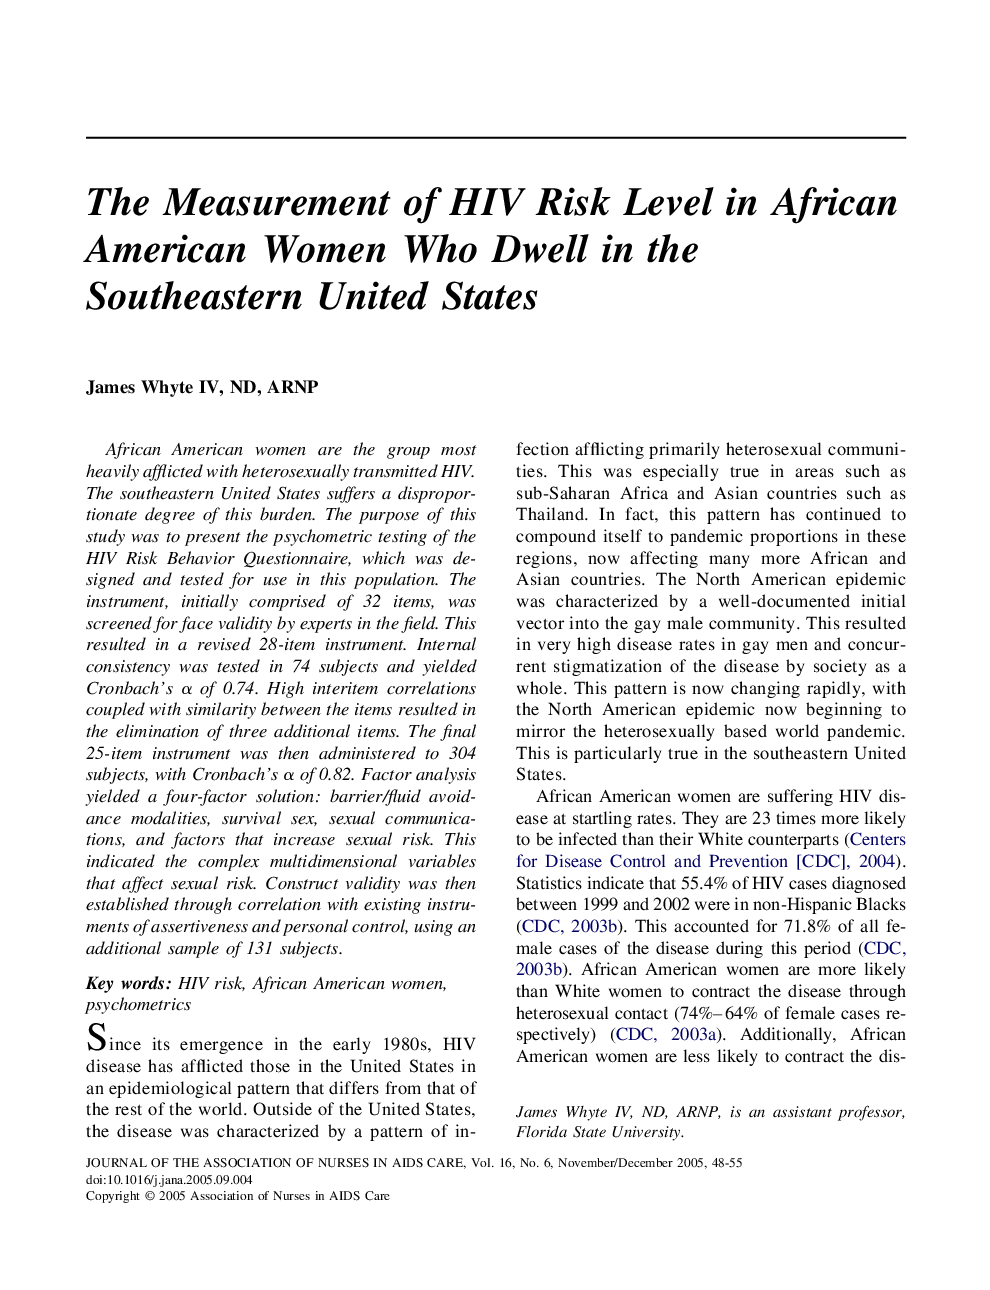 The Measurement of HIV Risk Level in African American Women Who Dwell in the Southeastern United States